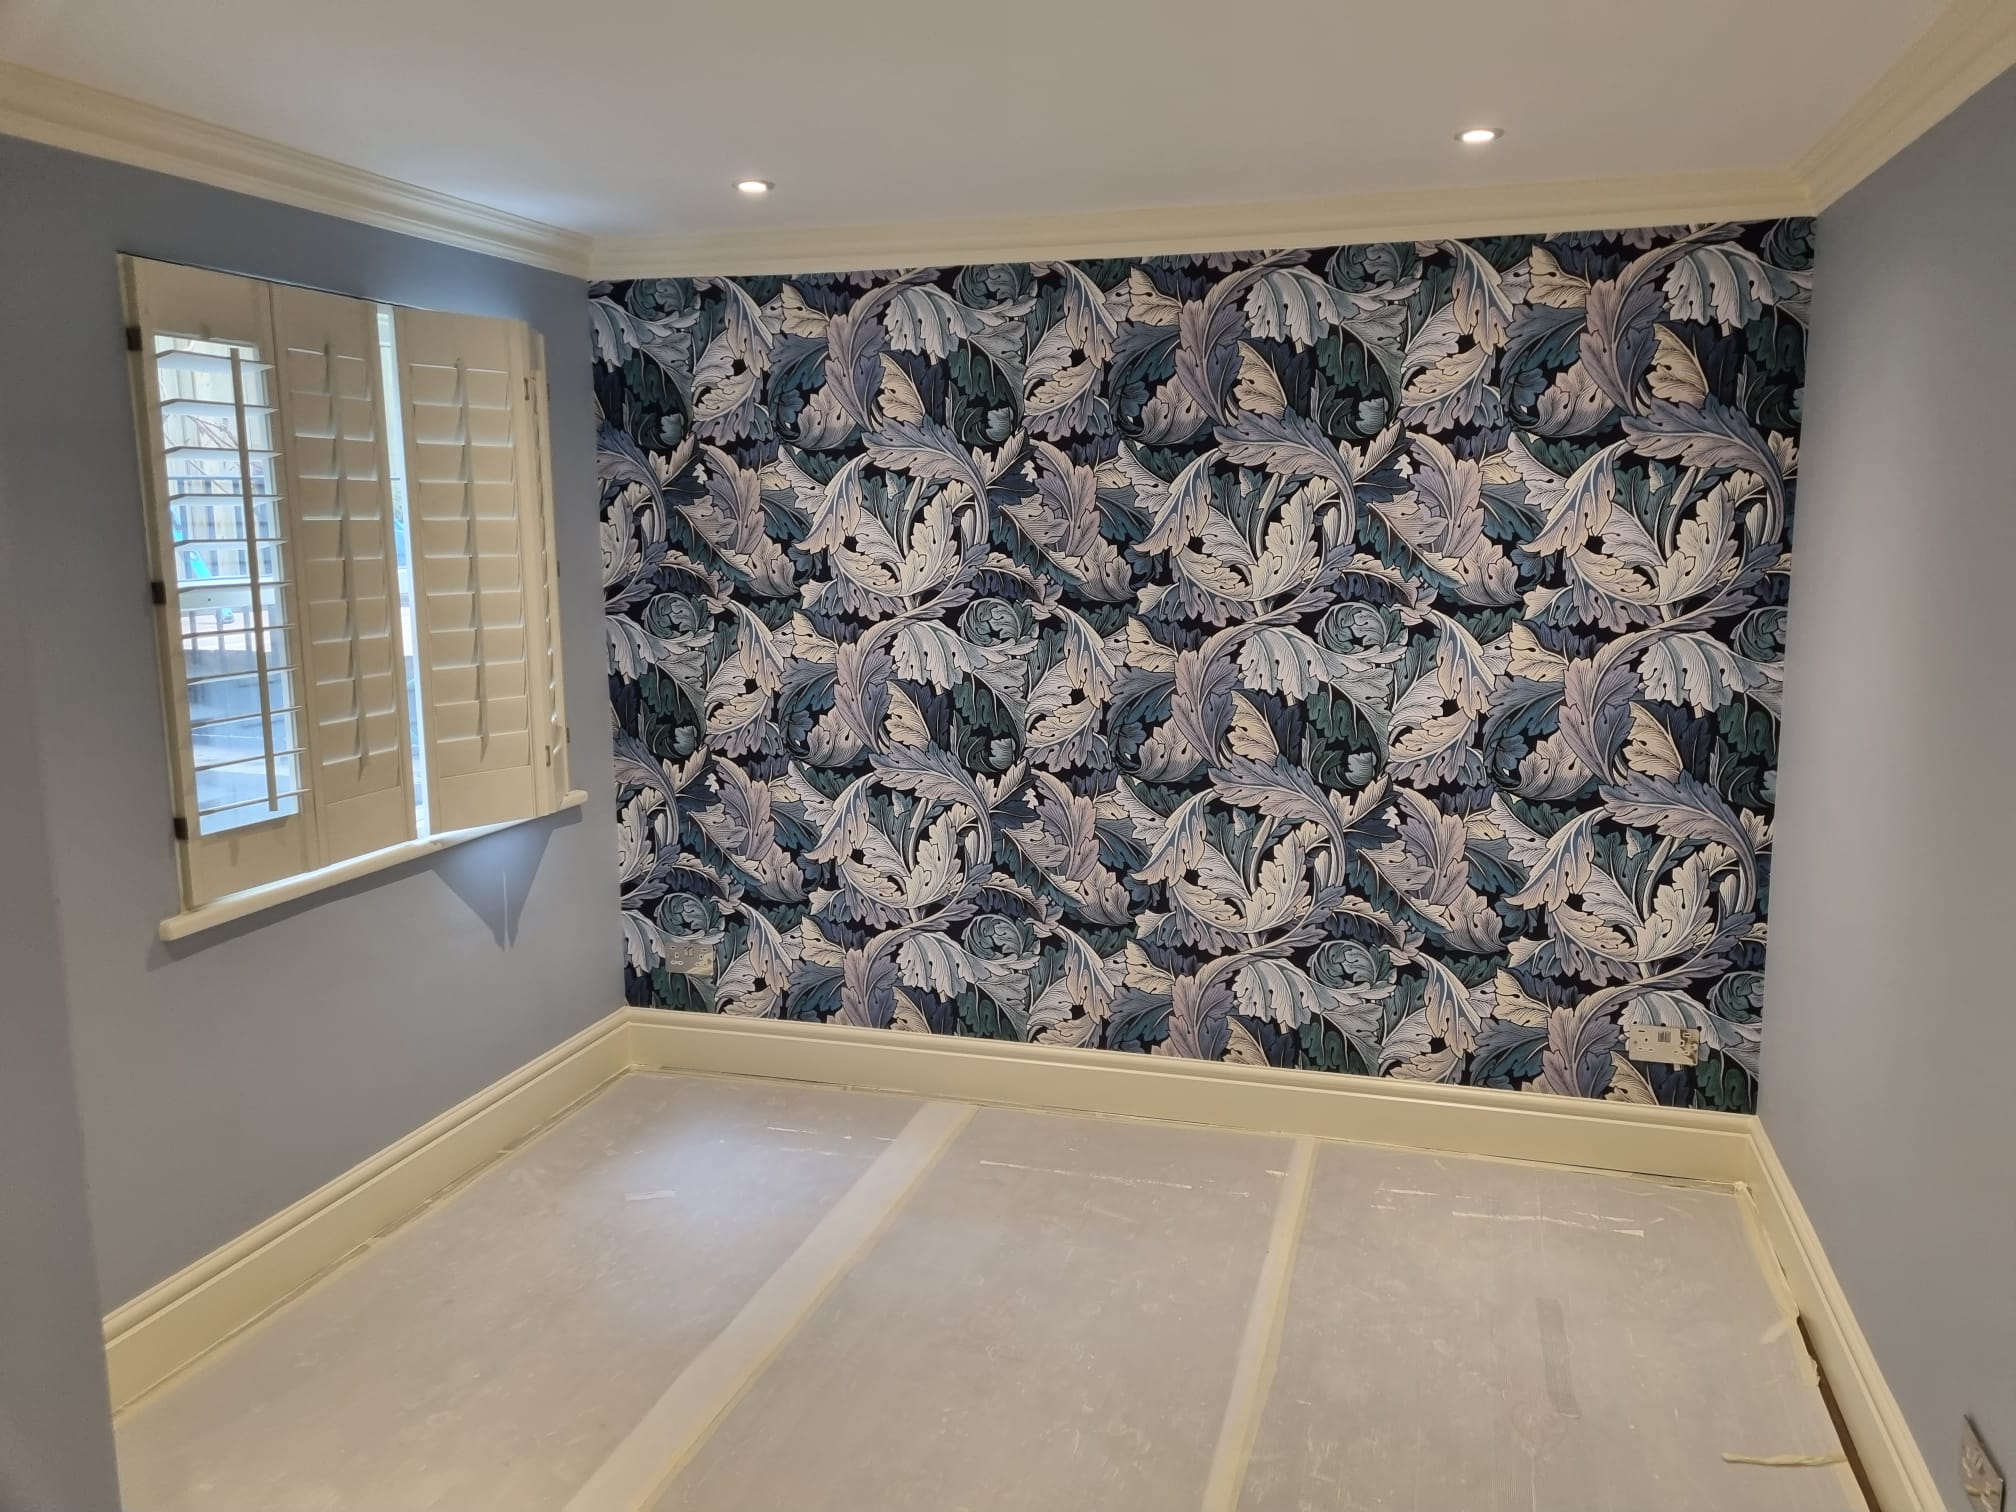 Wall Insulation and Decorative Wall Paper Installation